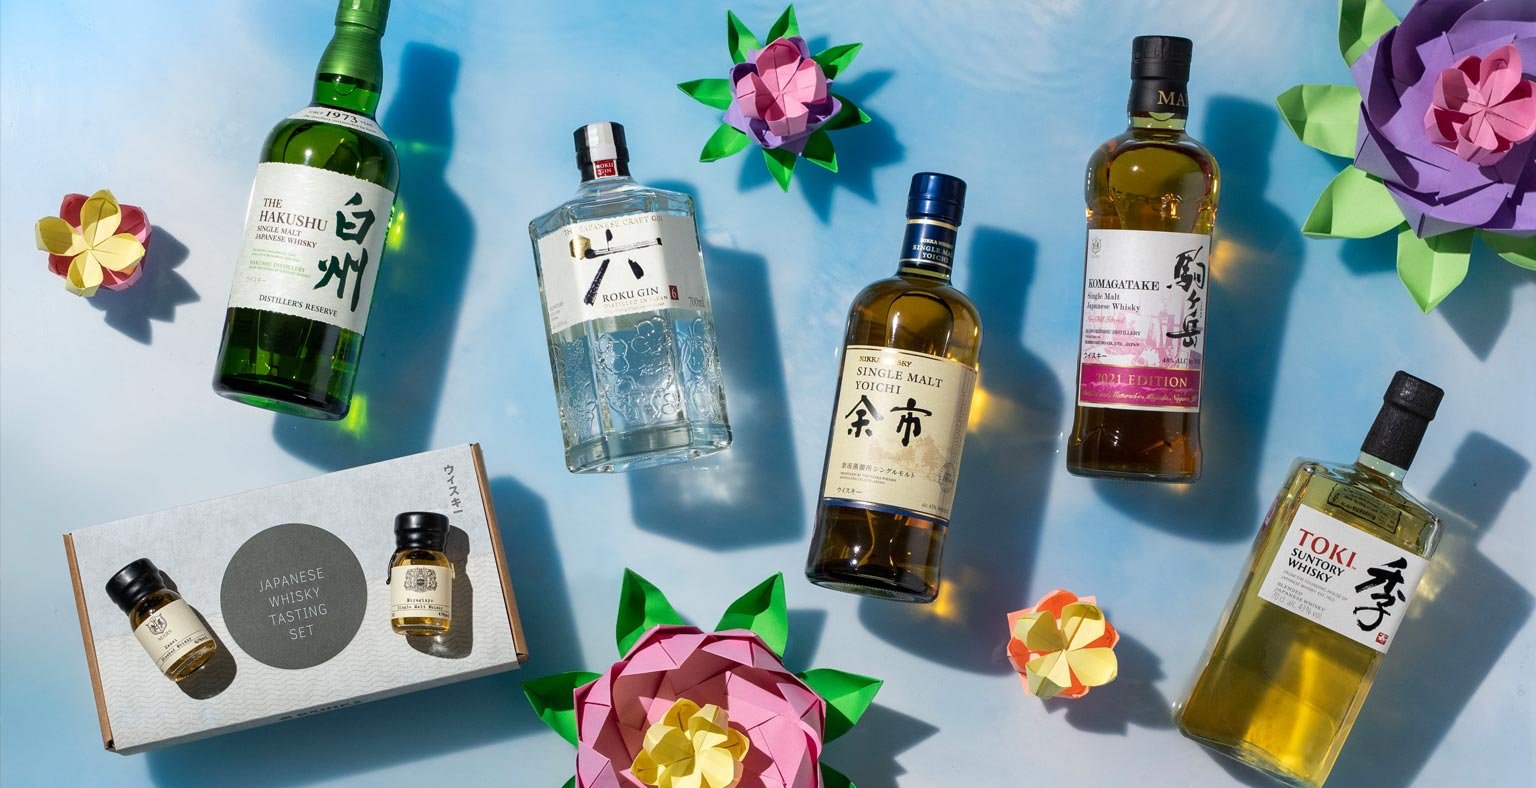 Bottles of Japanese spirits on a blue background with origami flowers